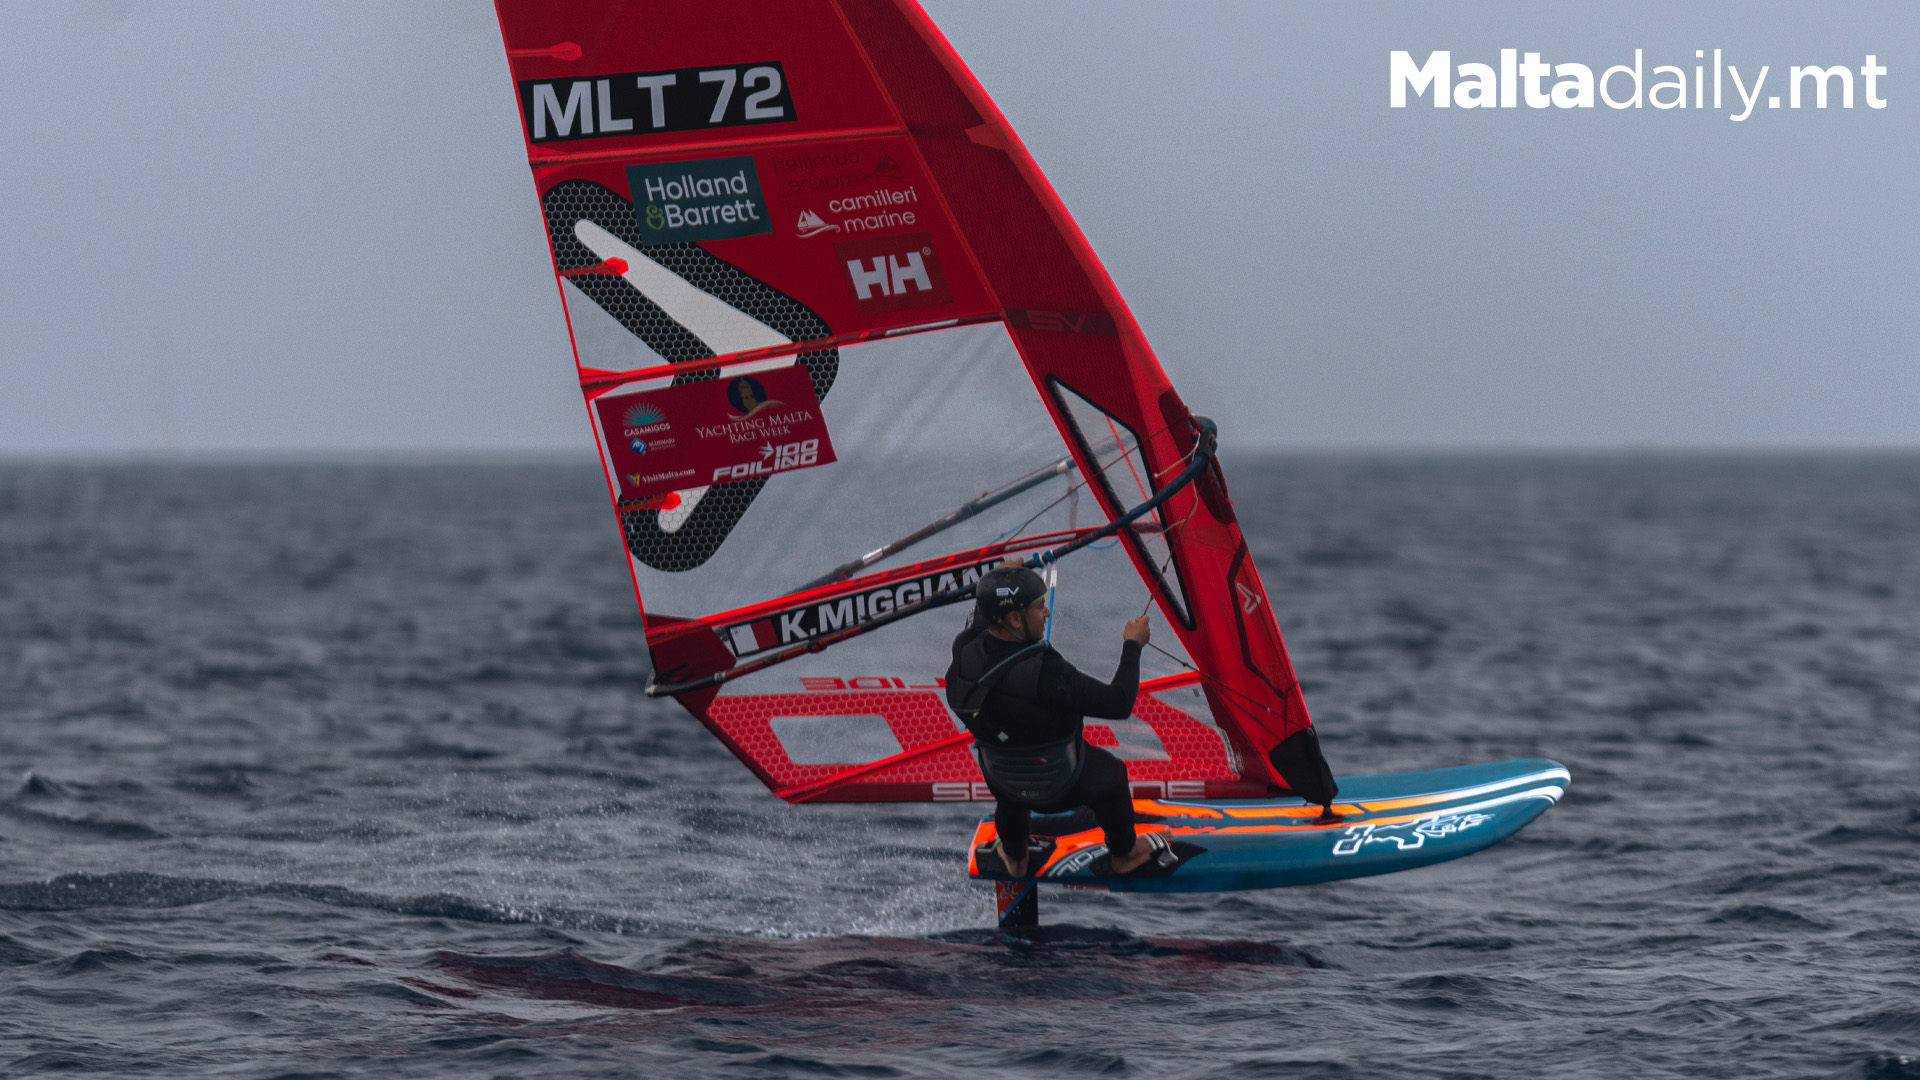 Karl Miggiani Sets National Sailing Record In Challenging Conditions